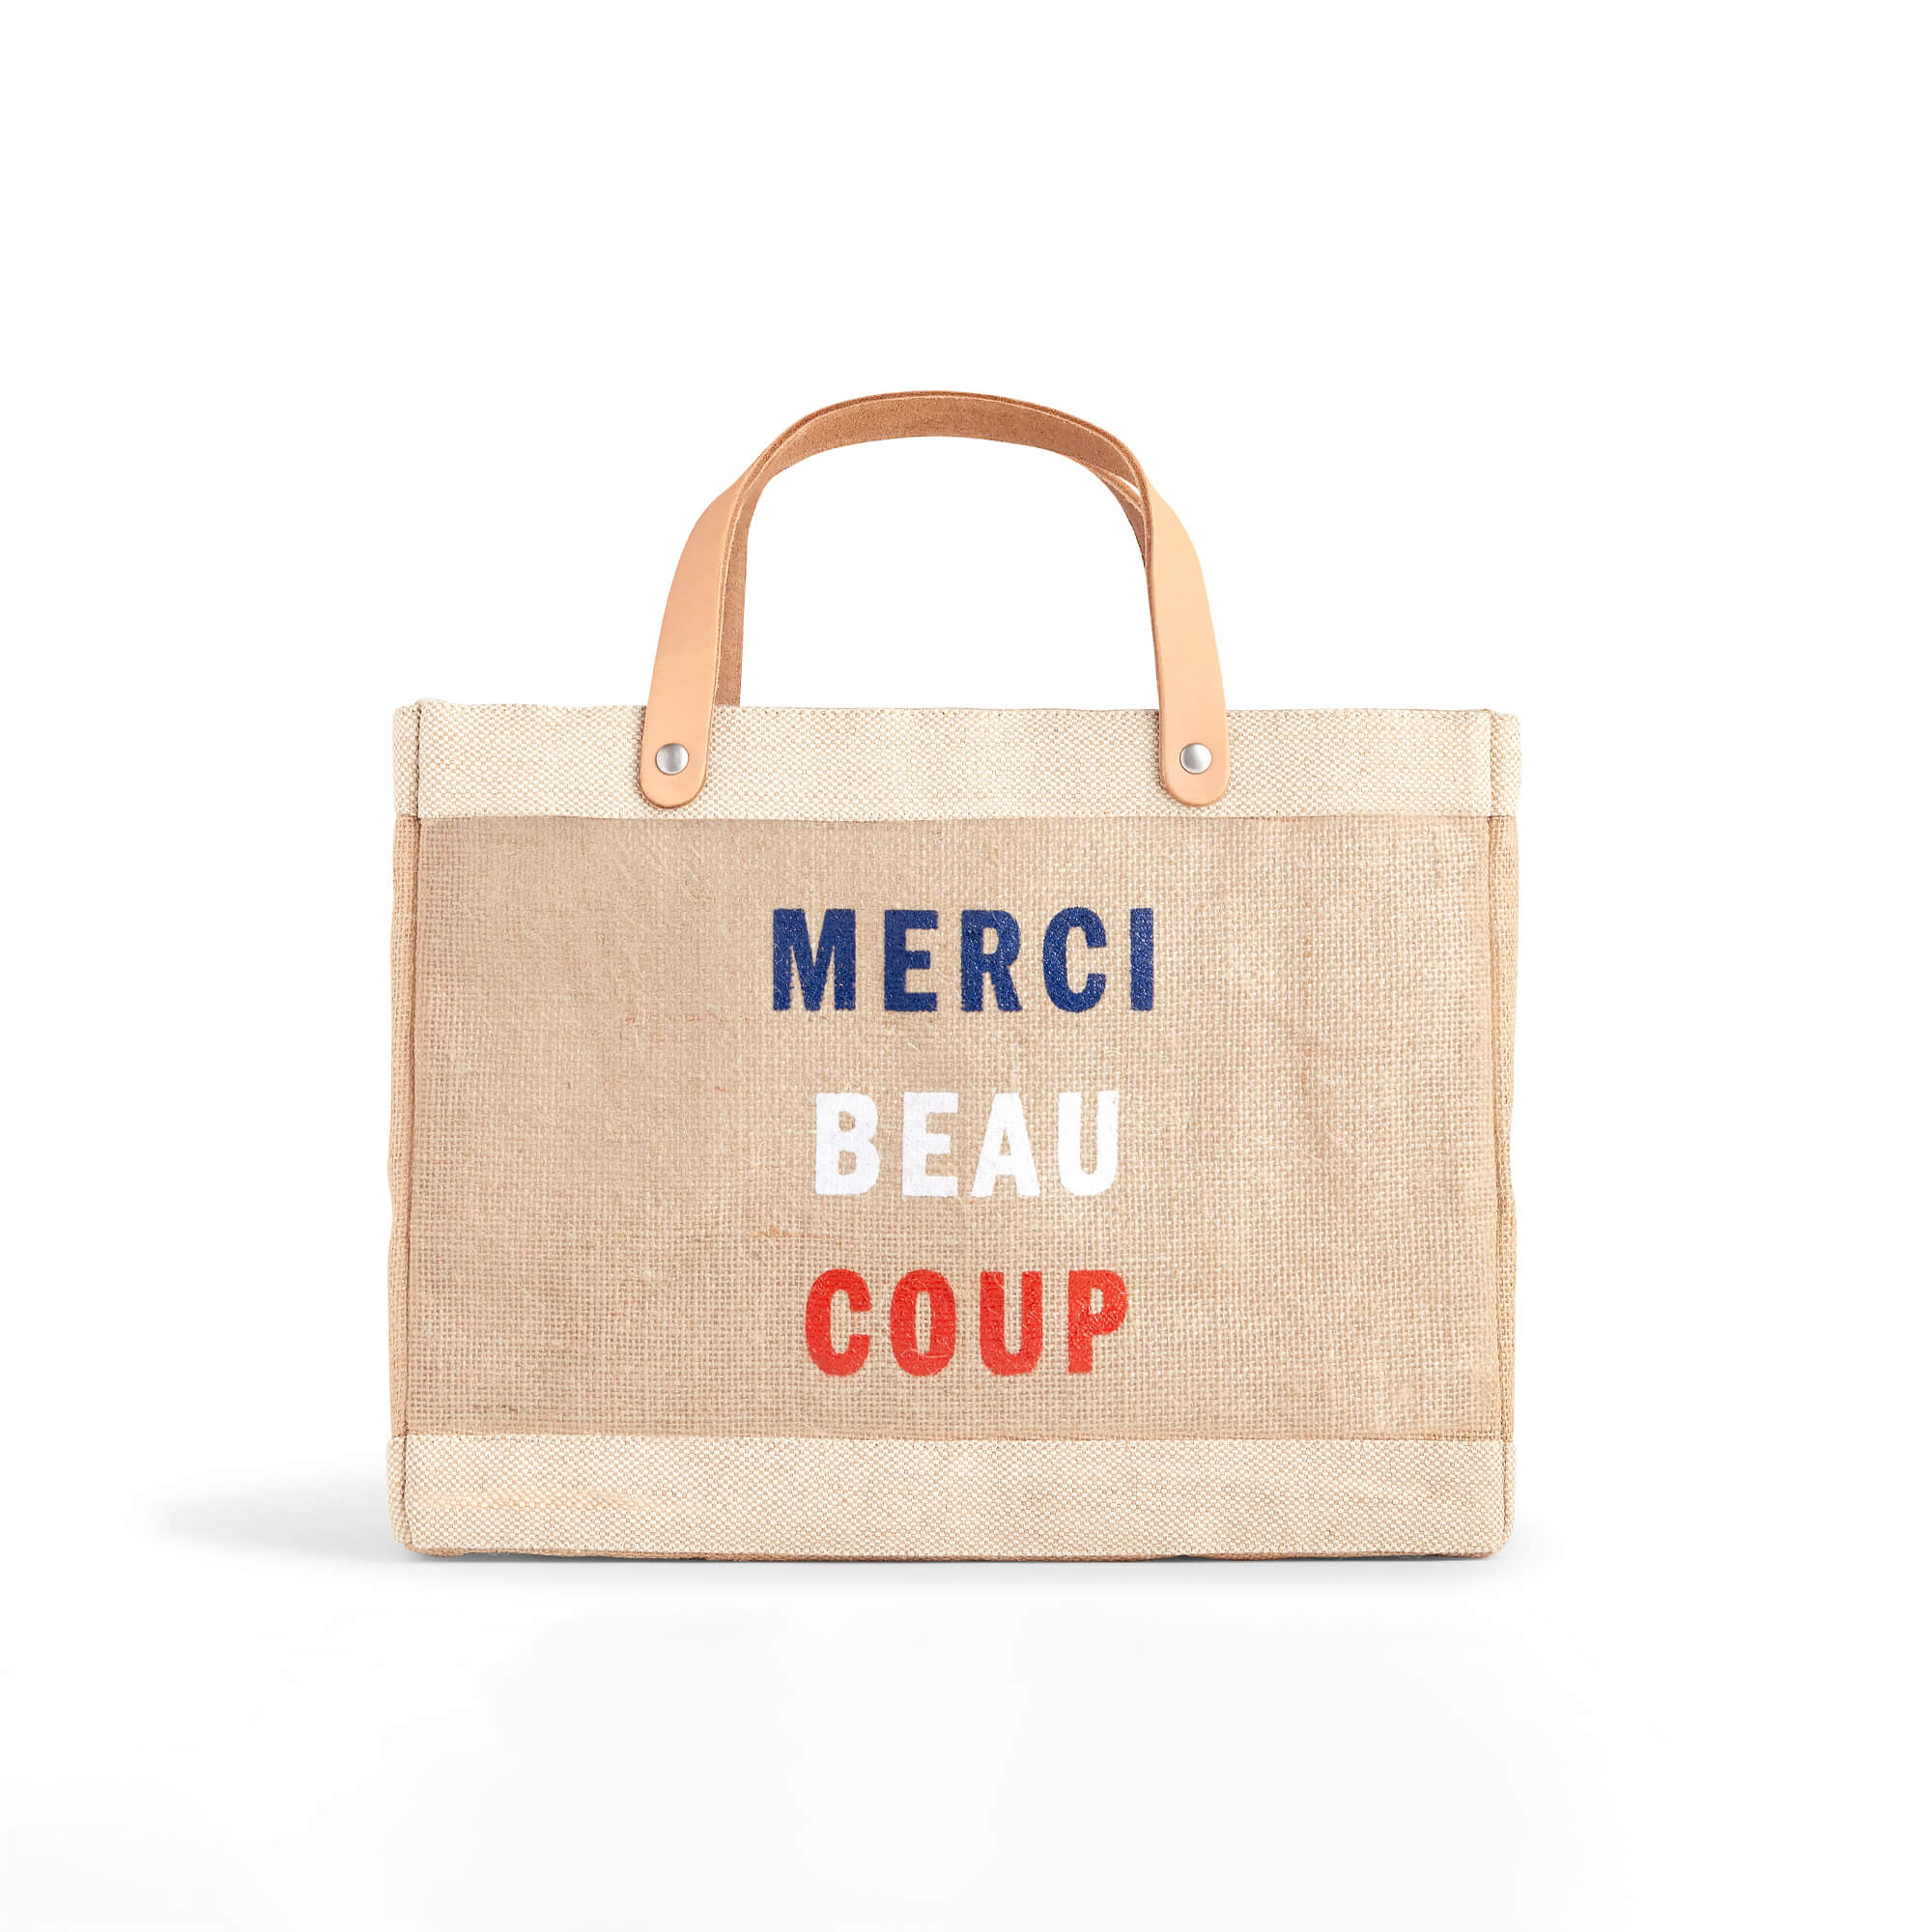 Market Tote in Natural for Clare V. “Merci Beau Coup” with Heart Embro